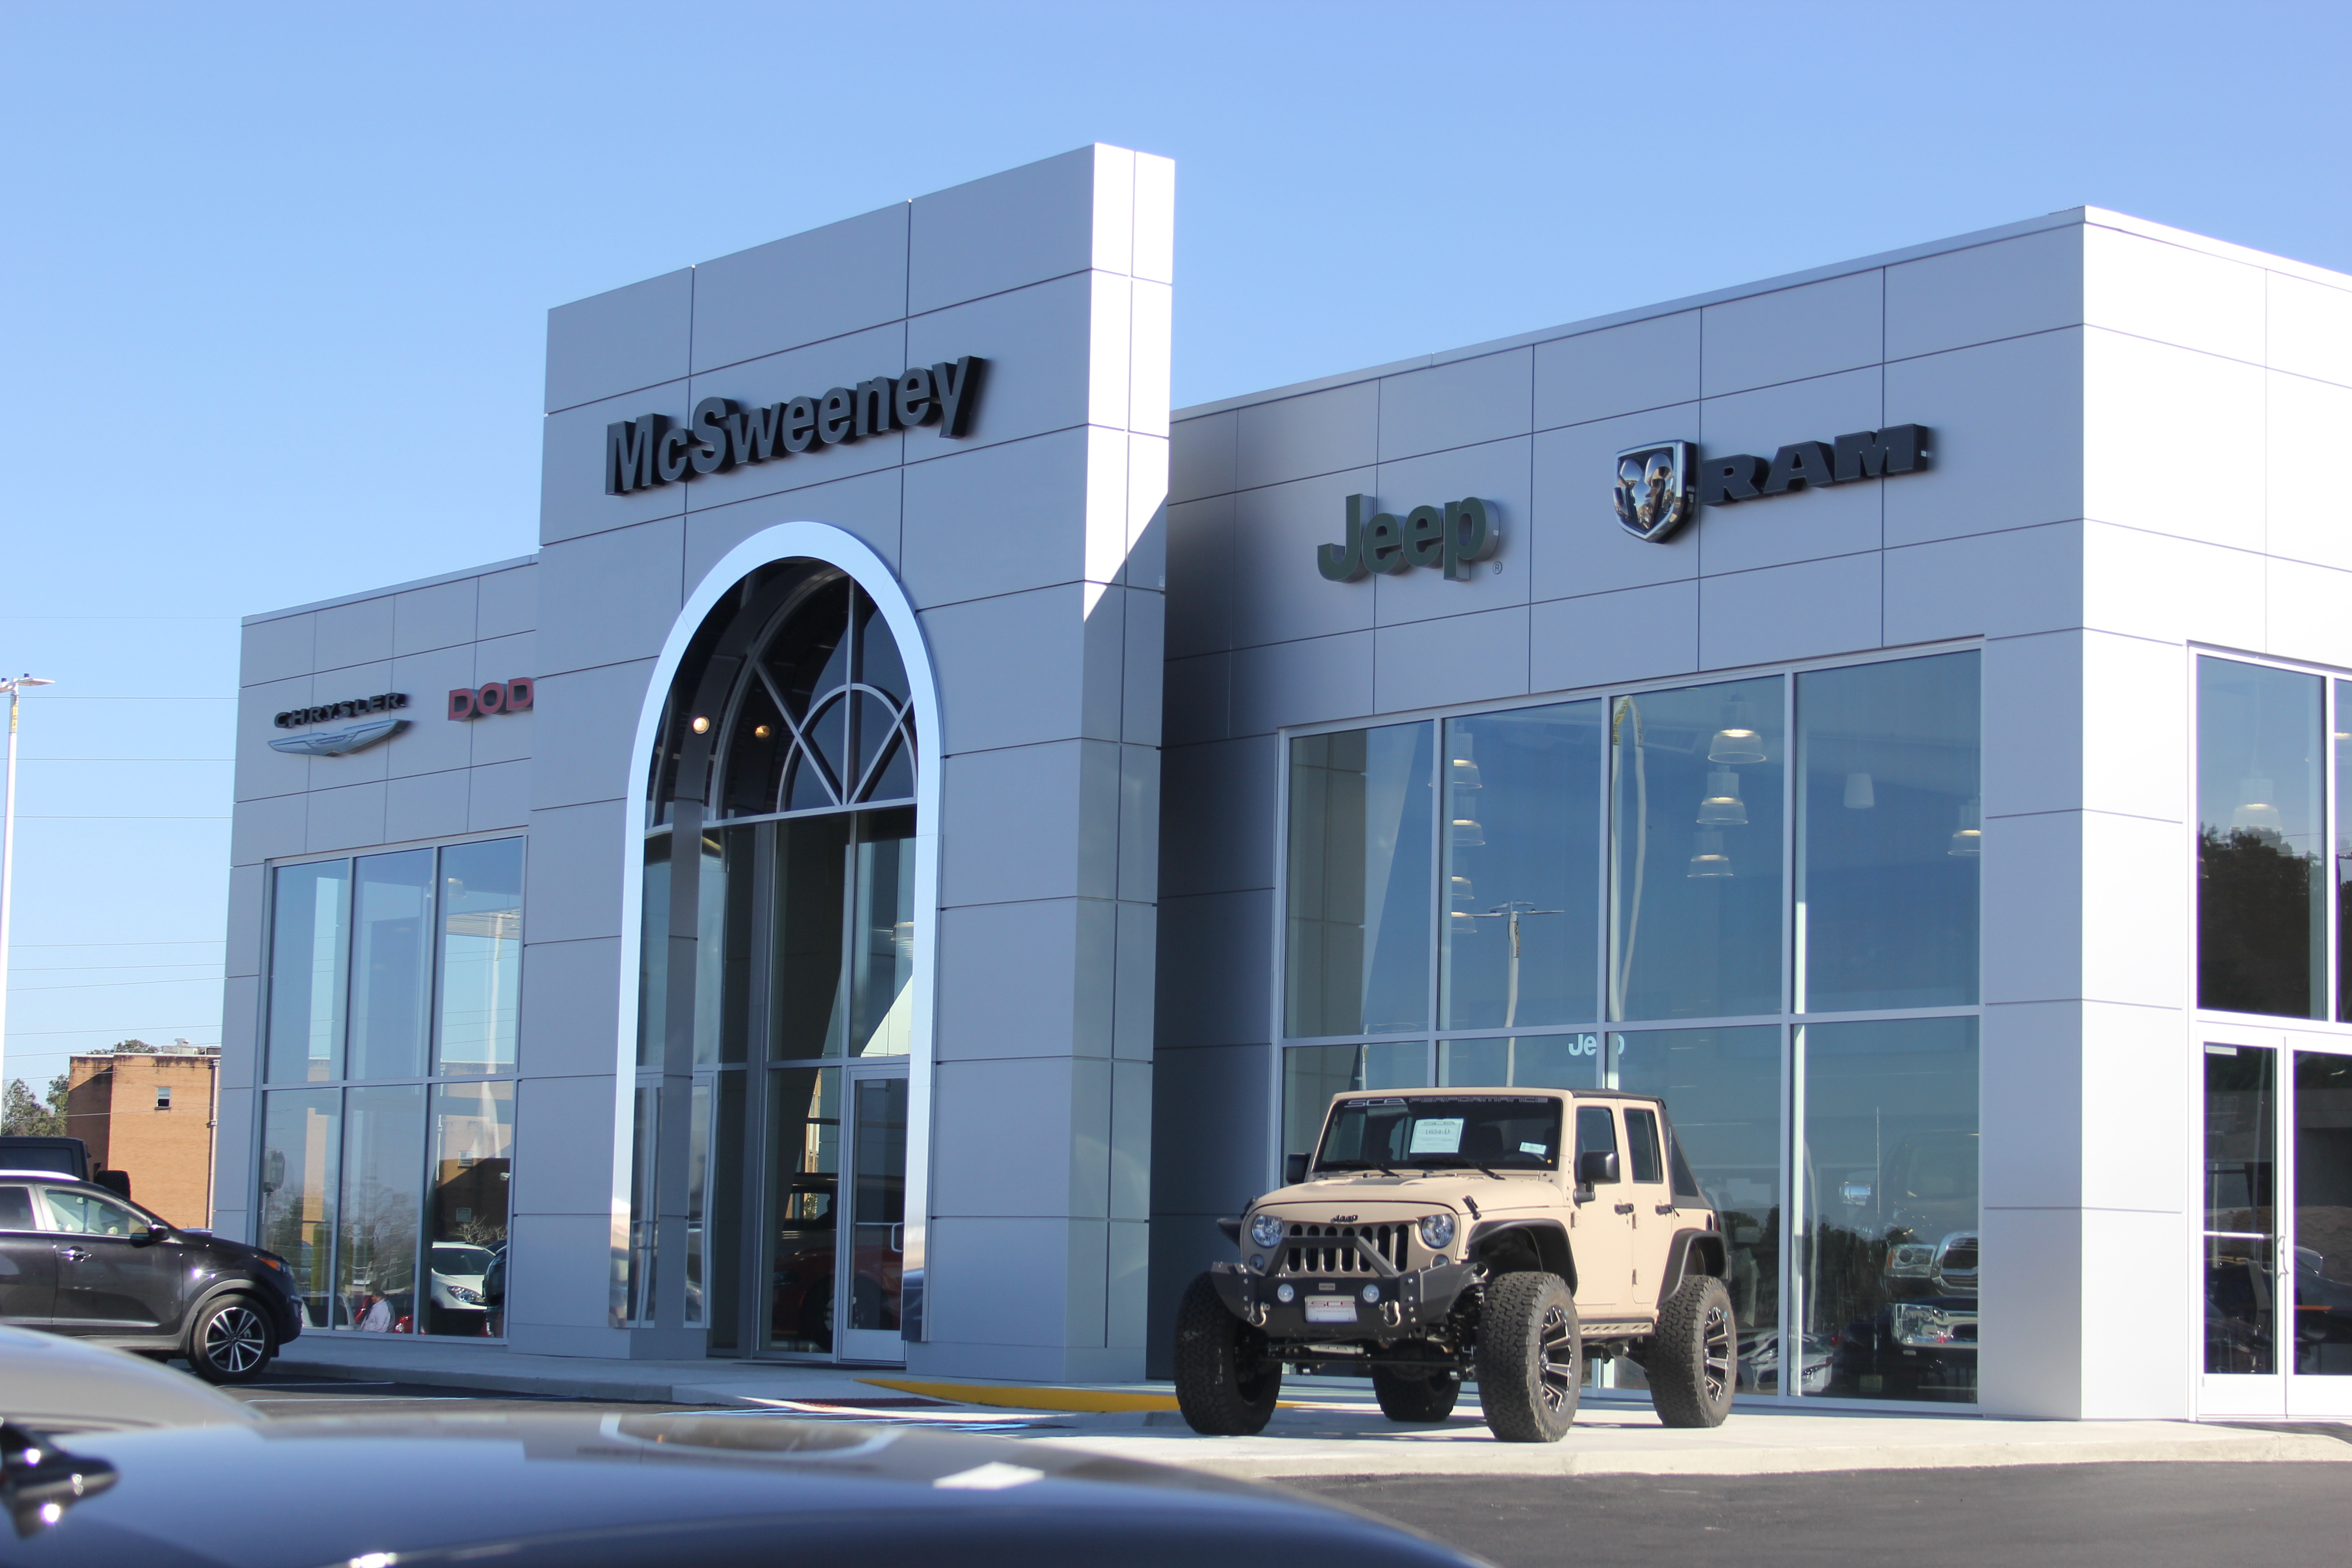 McSweeney Chrysler-Dodge-Jeep-RAM offers a variety of custom vehicles with factory warranties